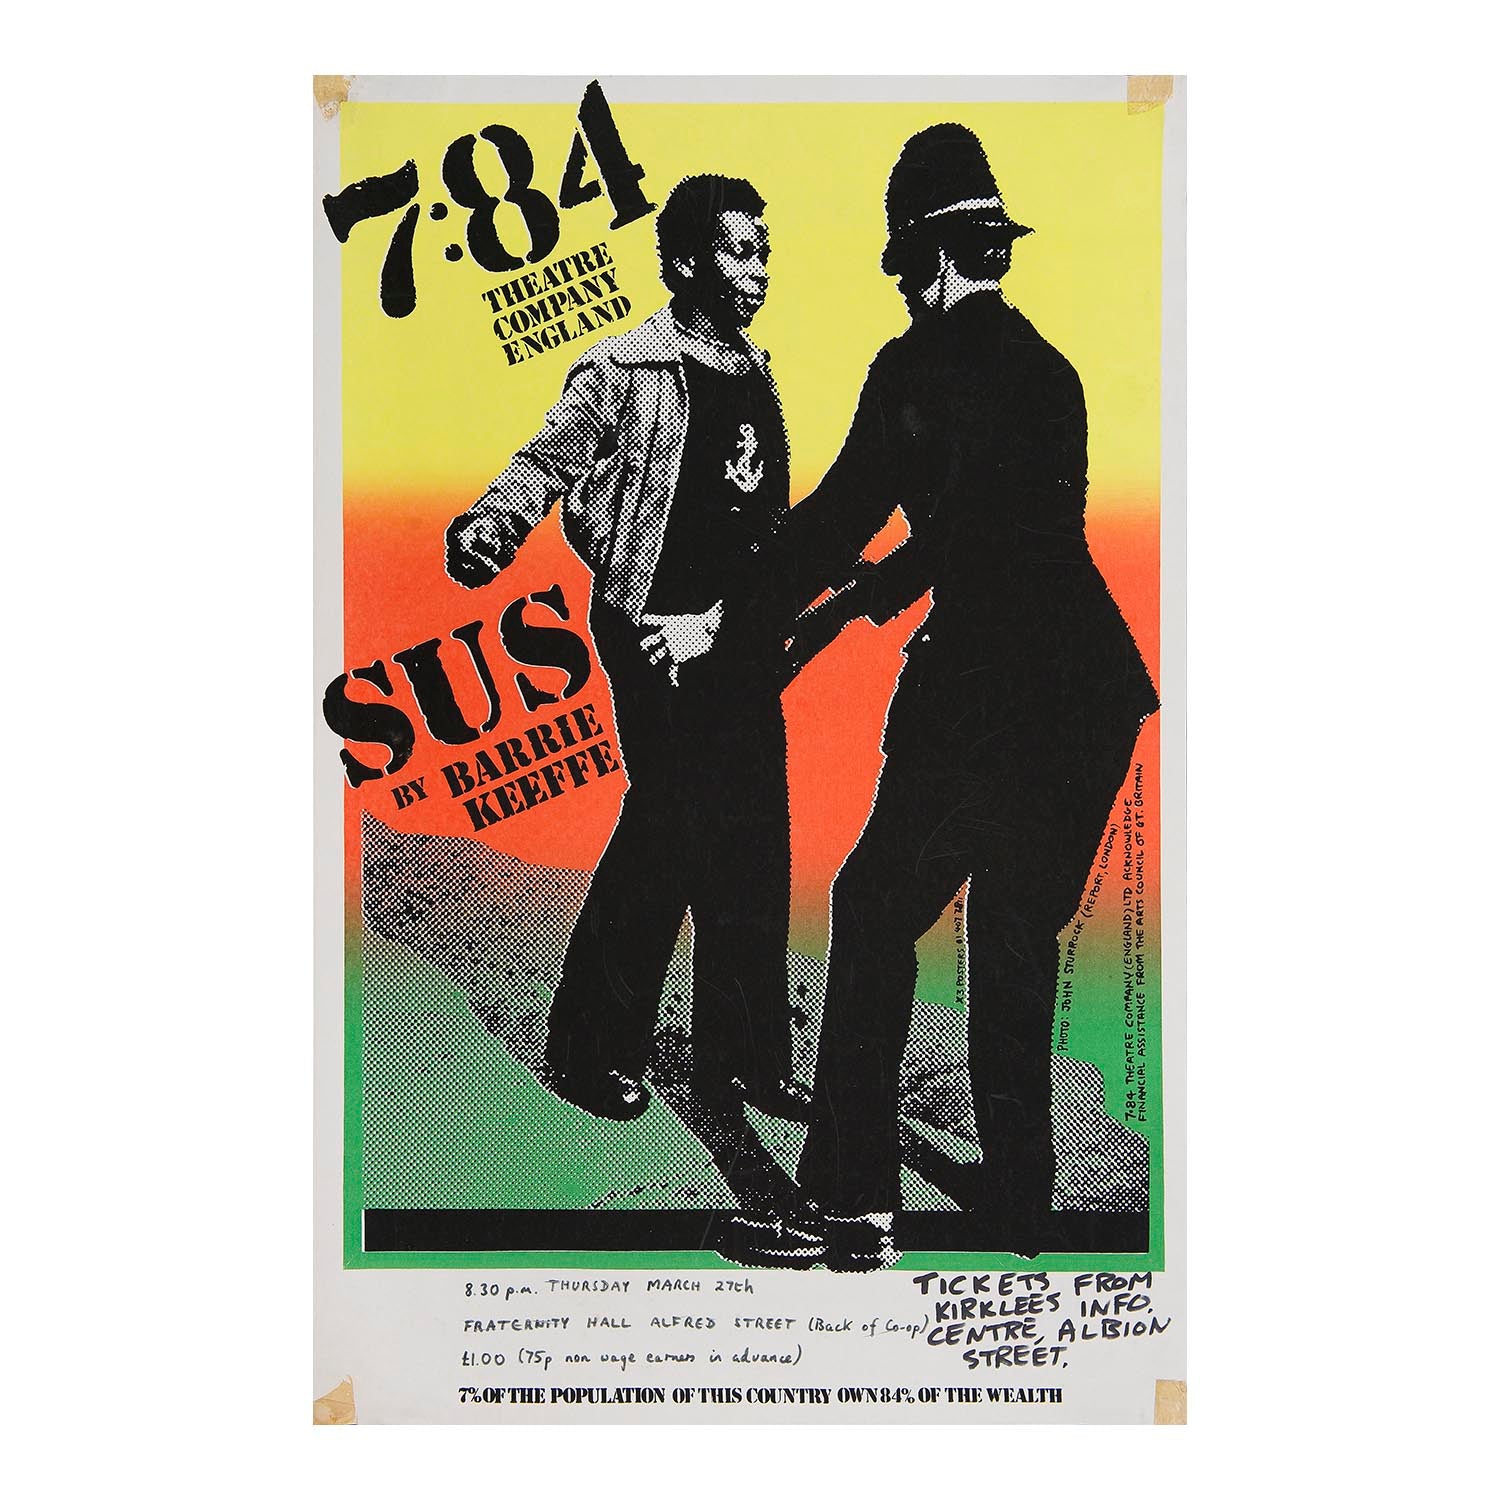 poster for Sus, by Barrie Keefe, 1979. Black youth apprehended and searched by uniformed police officer